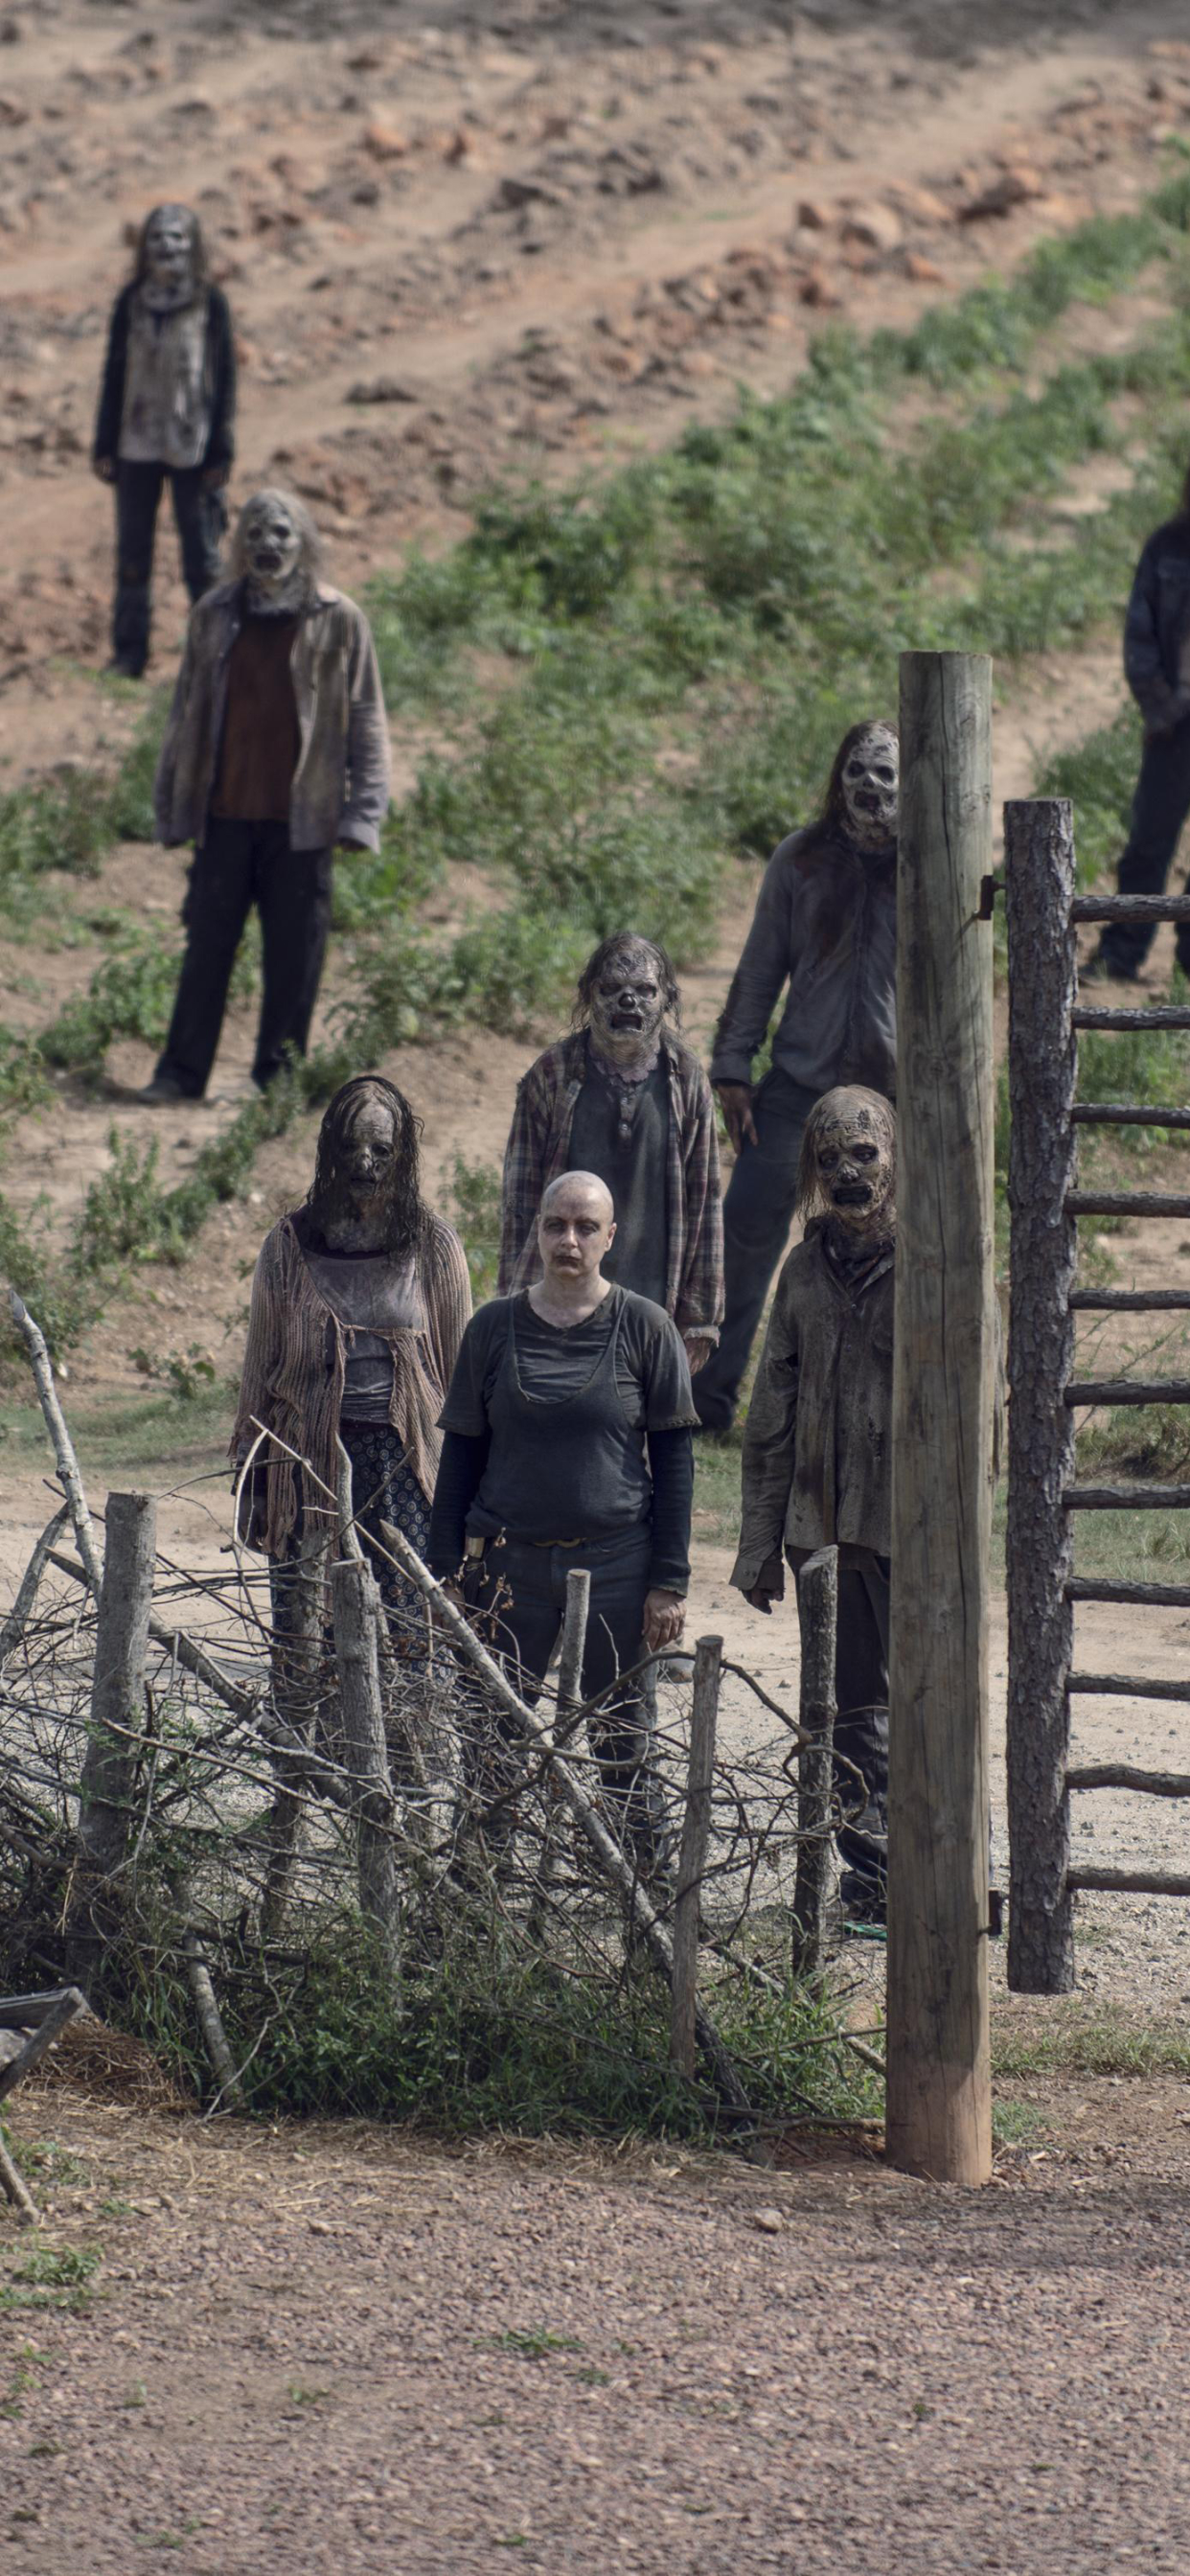  The Whisperers (Walking Dead) HQ Background Images